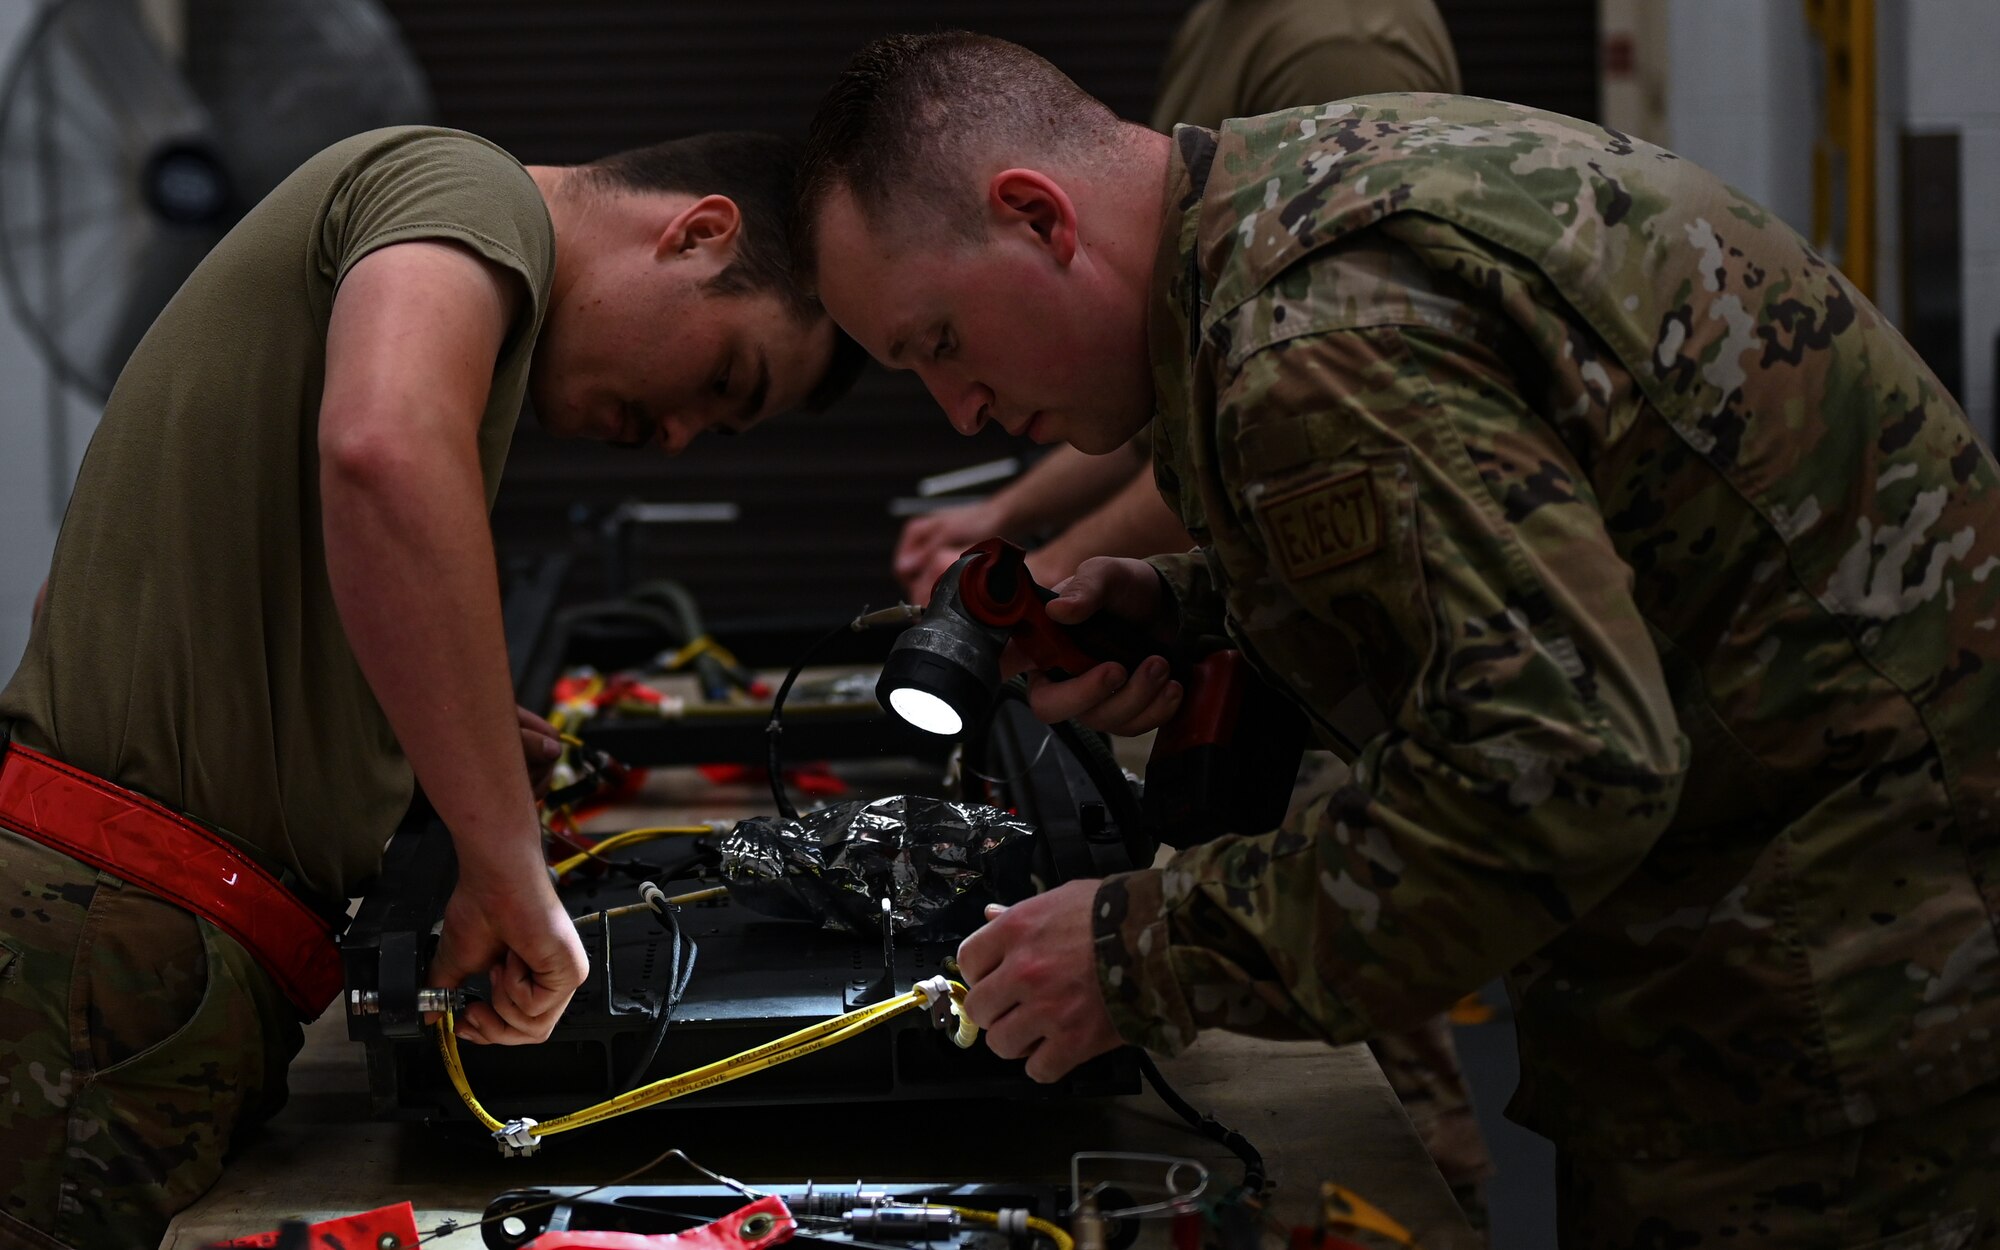 U.S. Air Force Staff Sgt. Marcus Sandifer, 509th Maintenance Squadron egress section non-commissioned officer in charge, inspects a B-2 Spirit ejection training seat with Airman 1st Class Korbyn Armijo-Pemble, 509th Maintenance Squadron aircrew egress journeyman, at Whiteman Air Force Base, Missouri, June 15, 2023. Egress is the system that controls the seats ejecting out of the B-2, in the case of an emergency, requiring the pilot and mission commander to get out of the aircraft in a hurry. (U.S. Air Force photo by Senior Airman Victoria Hommel)